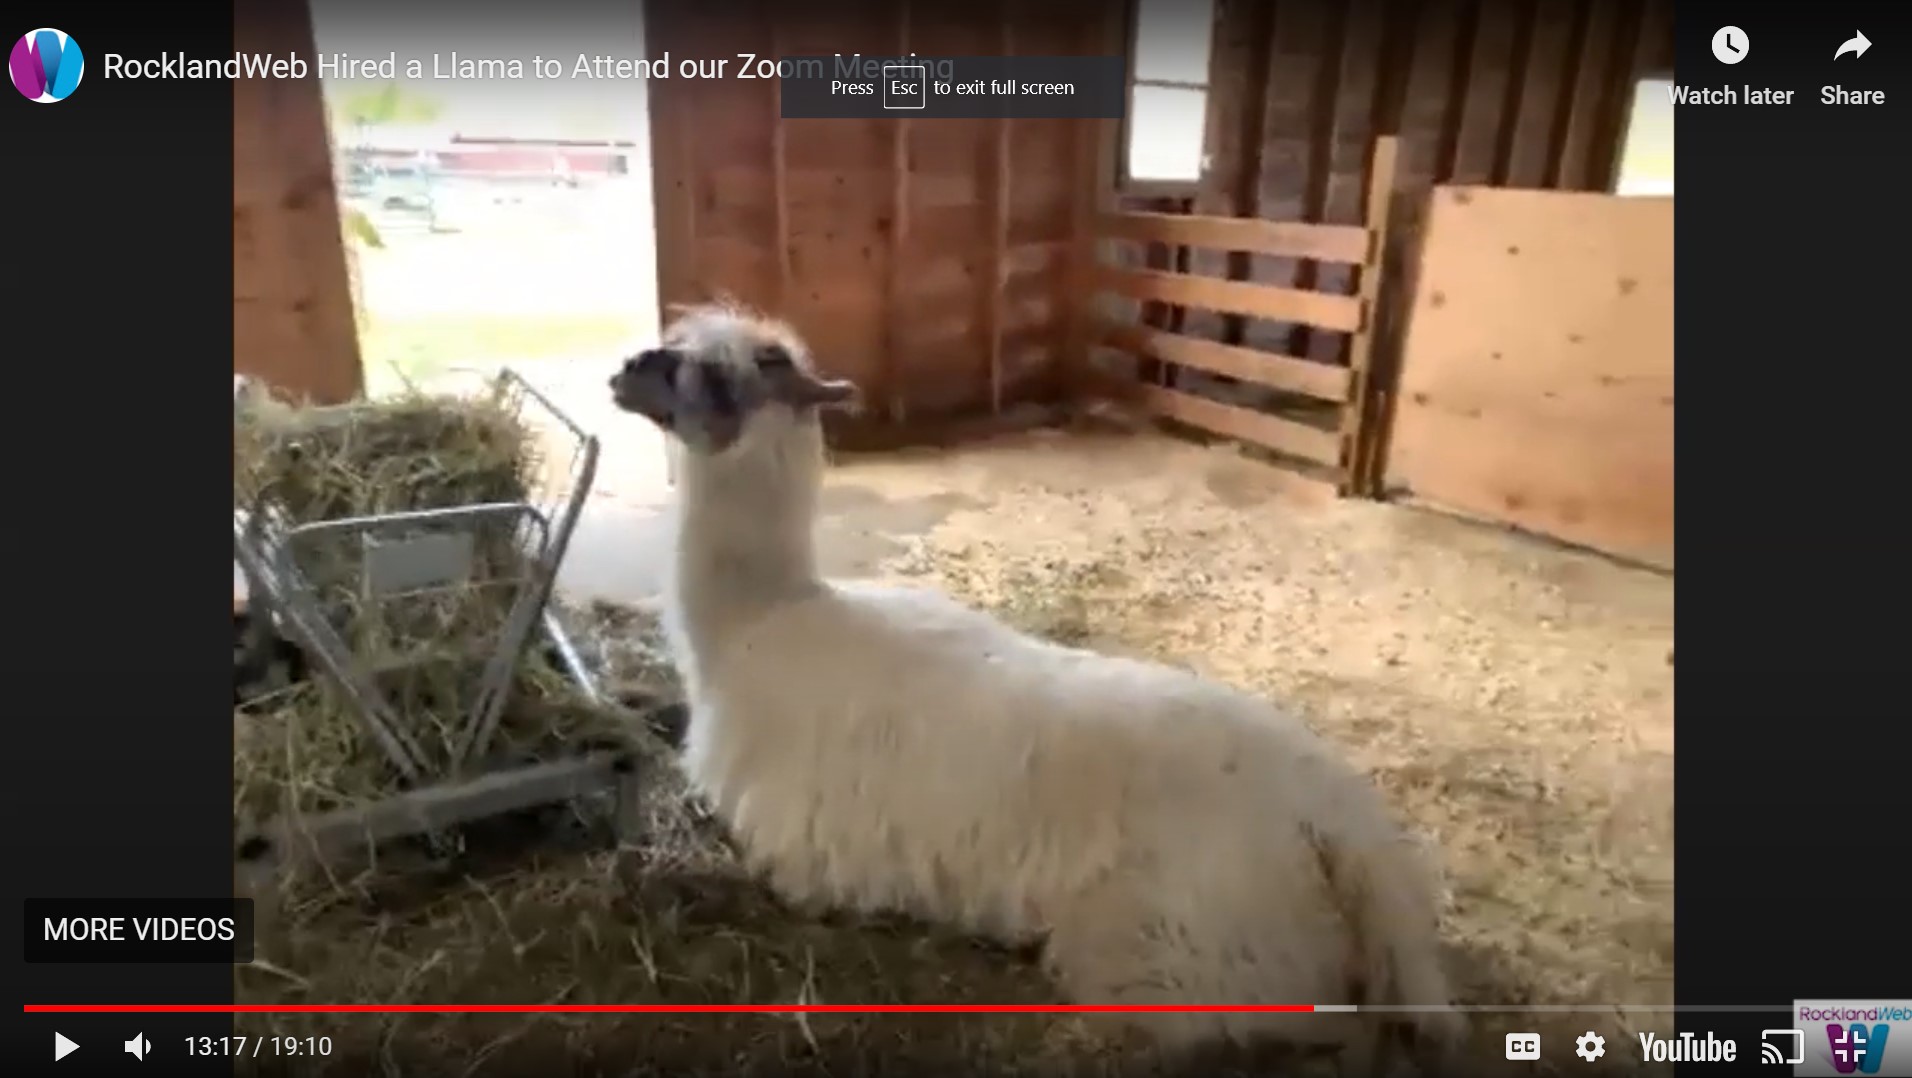 RocklandWeb Hired a Llama to Attend our Zoom Meeting